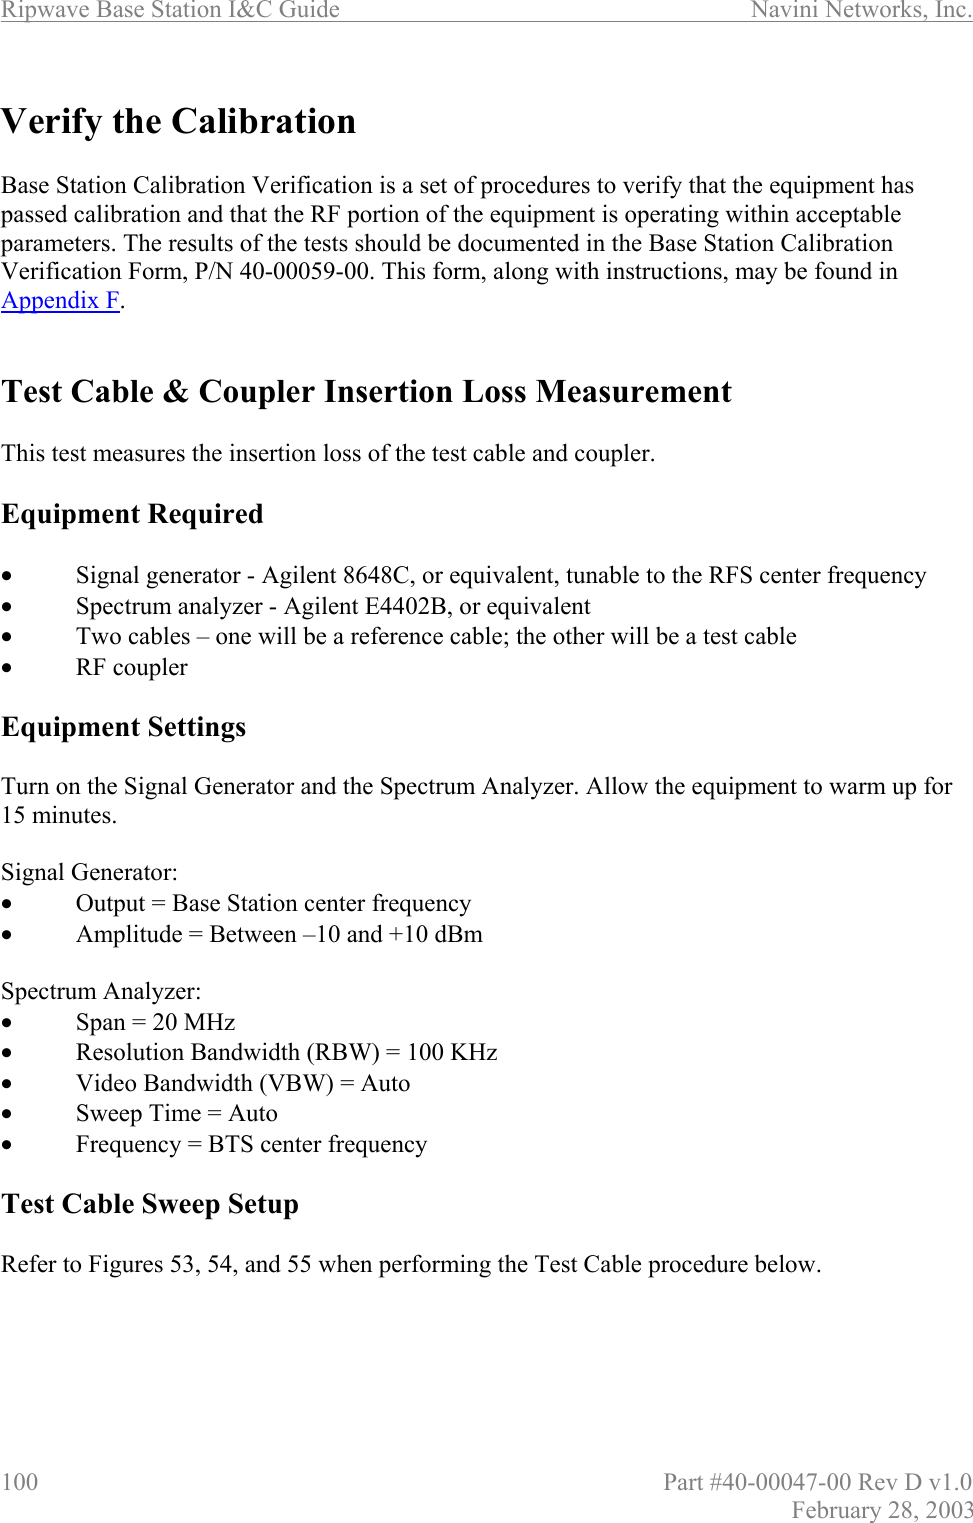 Ripwave Base Station I&amp;C Guide                      Navini Networks, Inc. 100                          Part #40-00047-00 Rev D v1.0 February 28, 2003  Verify the Calibration  Base Station Calibration Verification is a set of procedures to verify that the equipment has passed calibration and that the RF portion of the equipment is operating within acceptable parameters. The results of the tests should be documented in the Base Station Calibration Verification Form, P/N 40-00059-00. This form, along with instructions, may be found in Appendix F.   Test Cable &amp; Coupler Insertion Loss Measurement  This test measures the insertion loss of the test cable and coupler.   Equipment Required  •  Signal generator - Agilent 8648C, or equivalent, tunable to the RFS center frequency •  Spectrum analyzer - Agilent E4402B, or equivalent •  Two cables – one will be a reference cable; the other will be a test cable •  RF coupler  Equipment Settings  Turn on the Signal Generator and the Spectrum Analyzer. Allow the equipment to warm up for 15 minutes.  Signal Generator: •  Output = Base Station center frequency •  Amplitude = Between –10 and +10 dBm  Spectrum Analyzer: •  Span = 20 MHz •  Resolution Bandwidth (RBW) = 100 KHz •  Video Bandwidth (VBW) = Auto •  Sweep Time = Auto •  Frequency = BTS center frequency  Test Cable Sweep Setup  Refer to Figures 53, 54, and 55 when performing the Test Cable procedure below.     